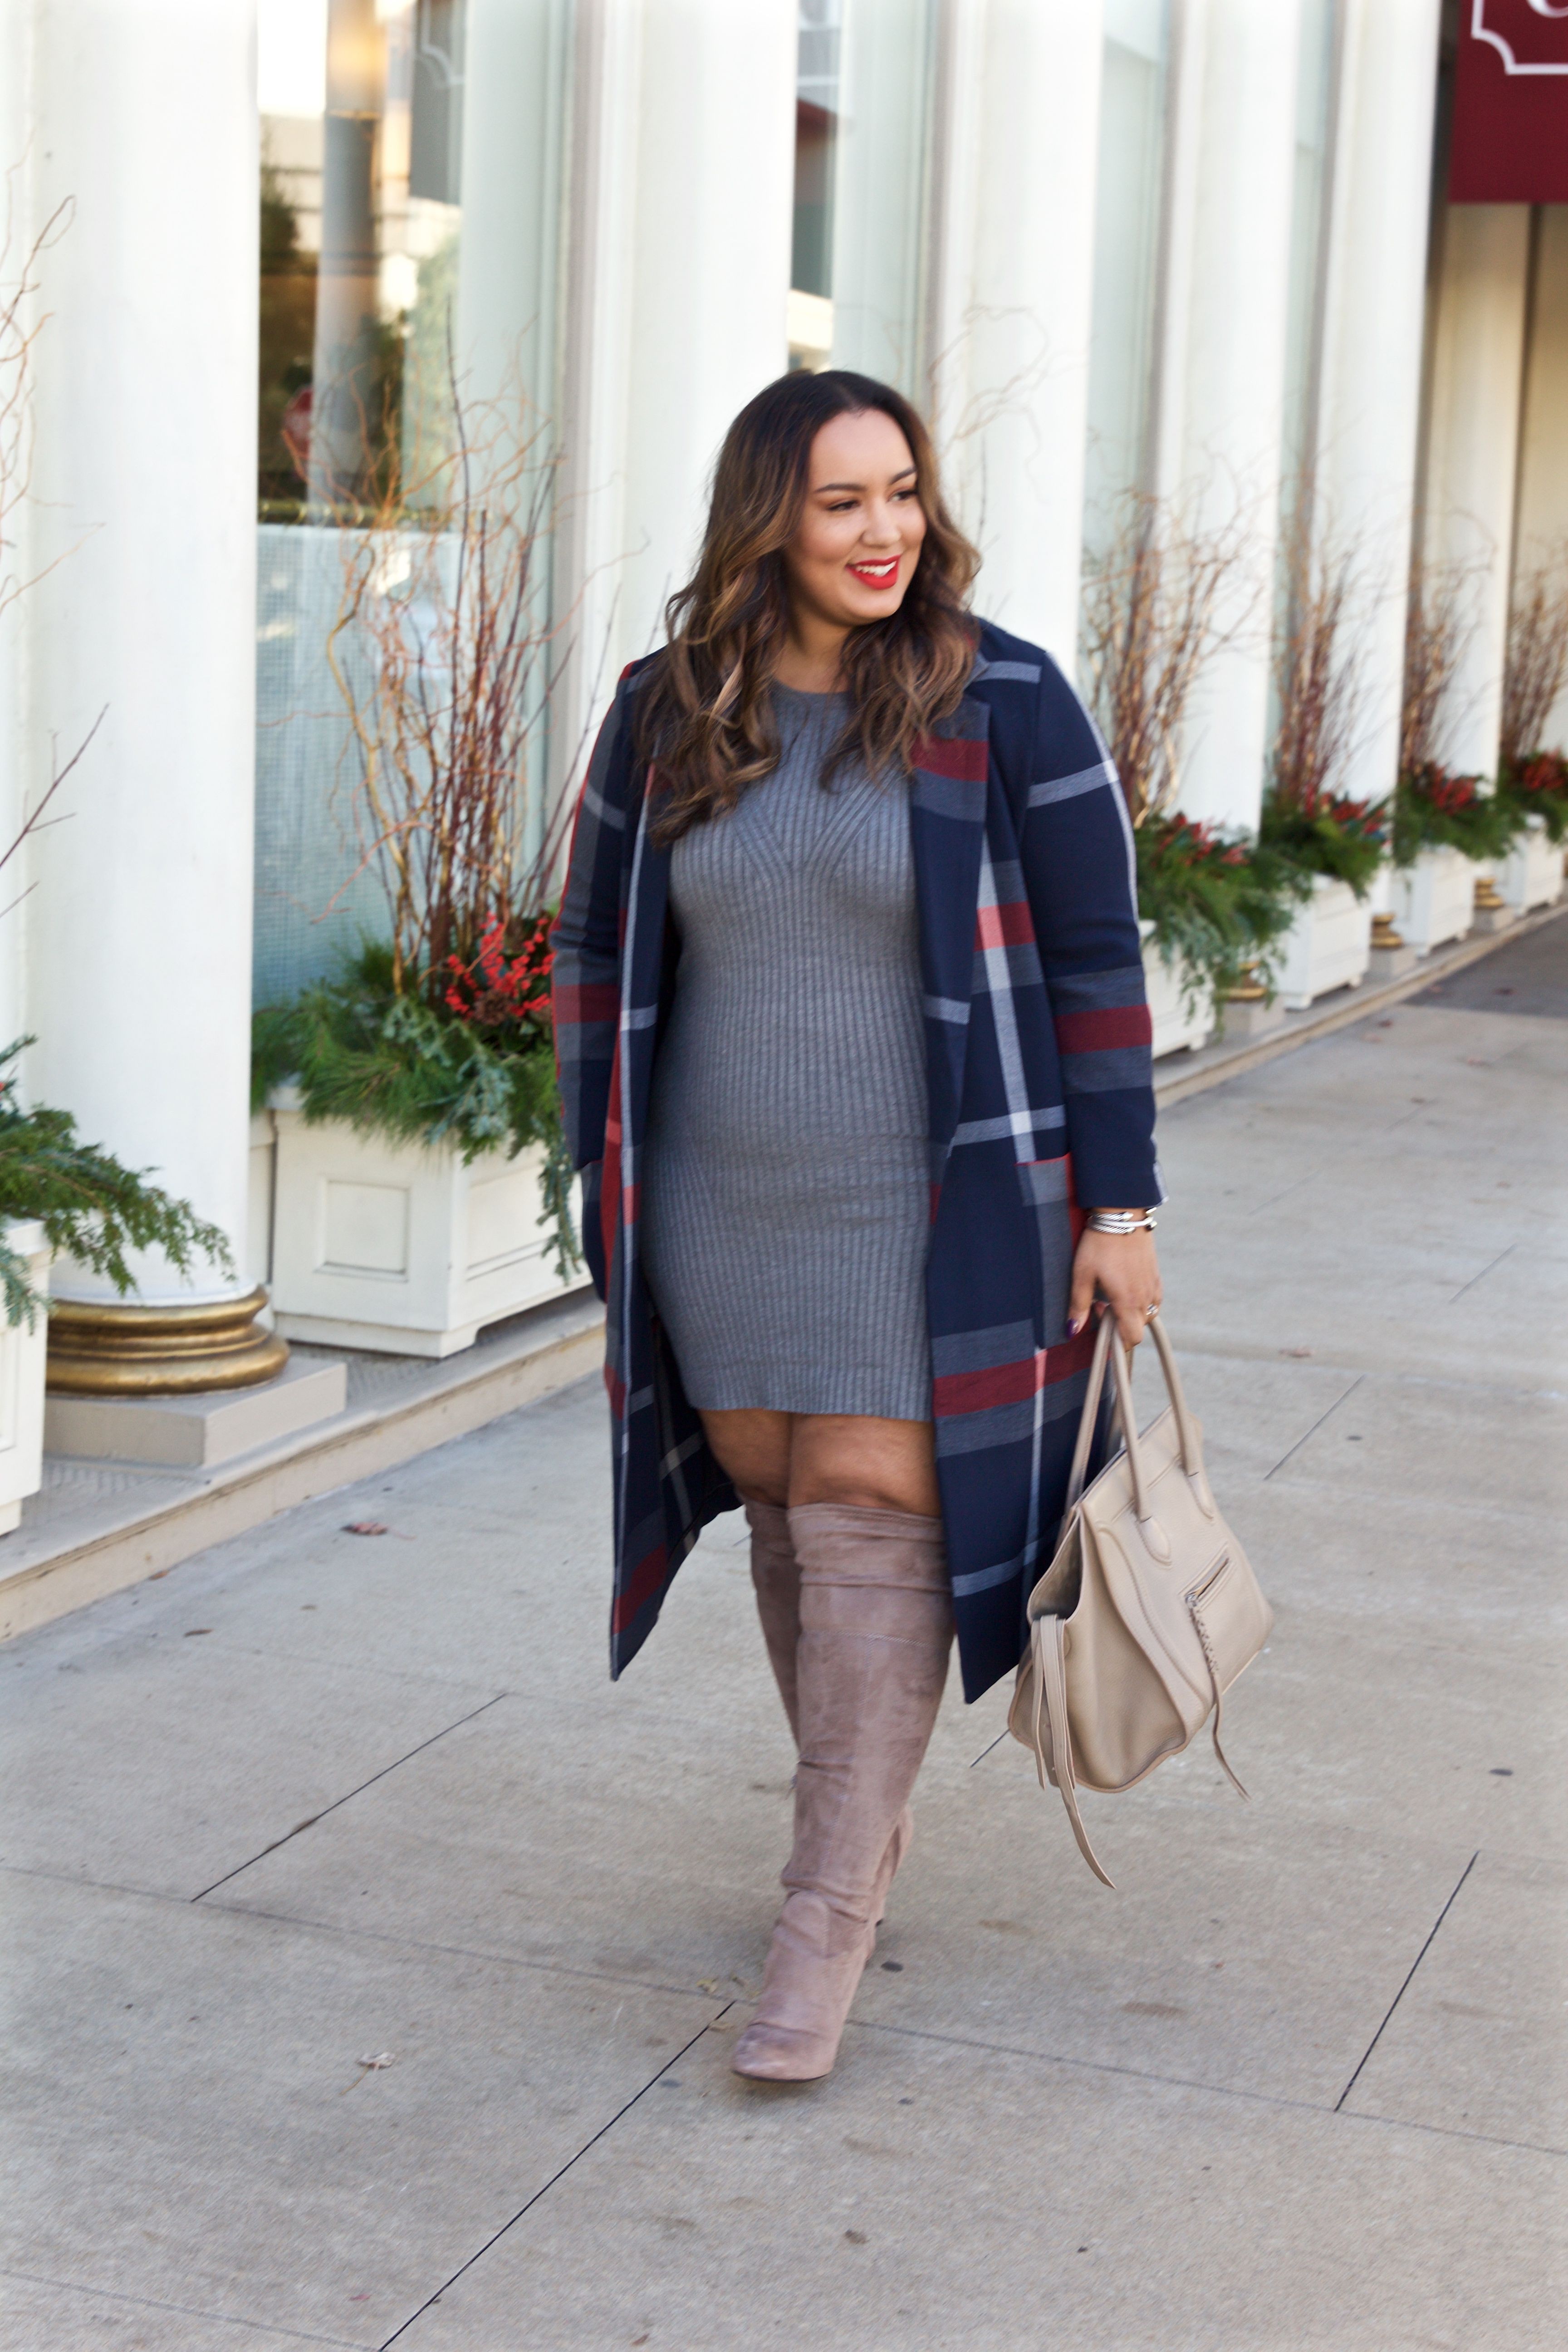 taupe dress boots